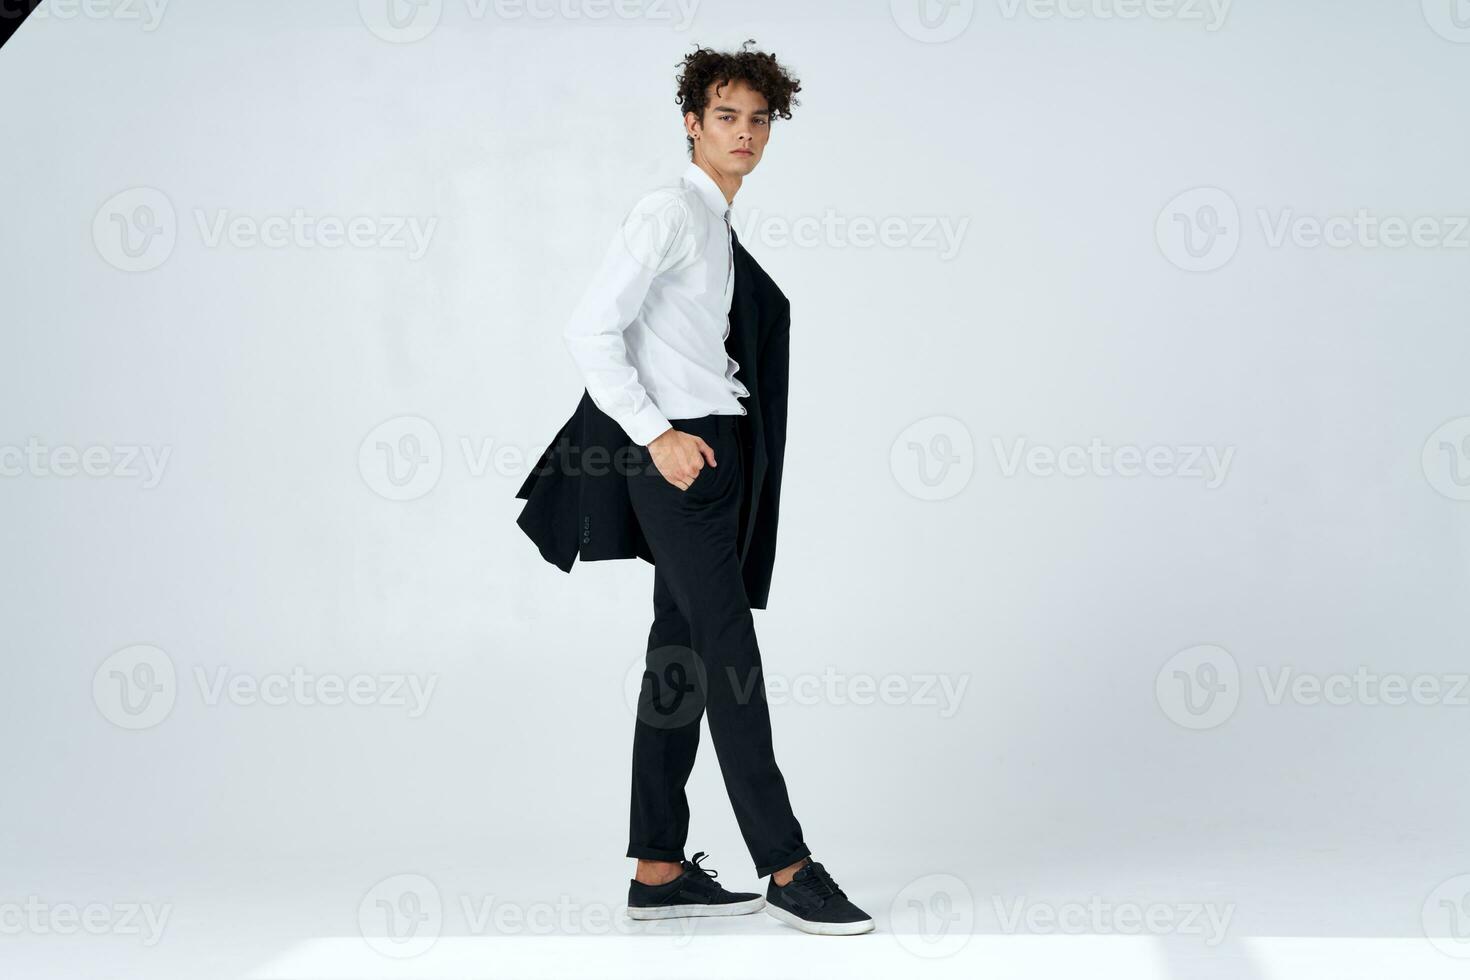 business man jacket shoulder self confidence curly hair photo